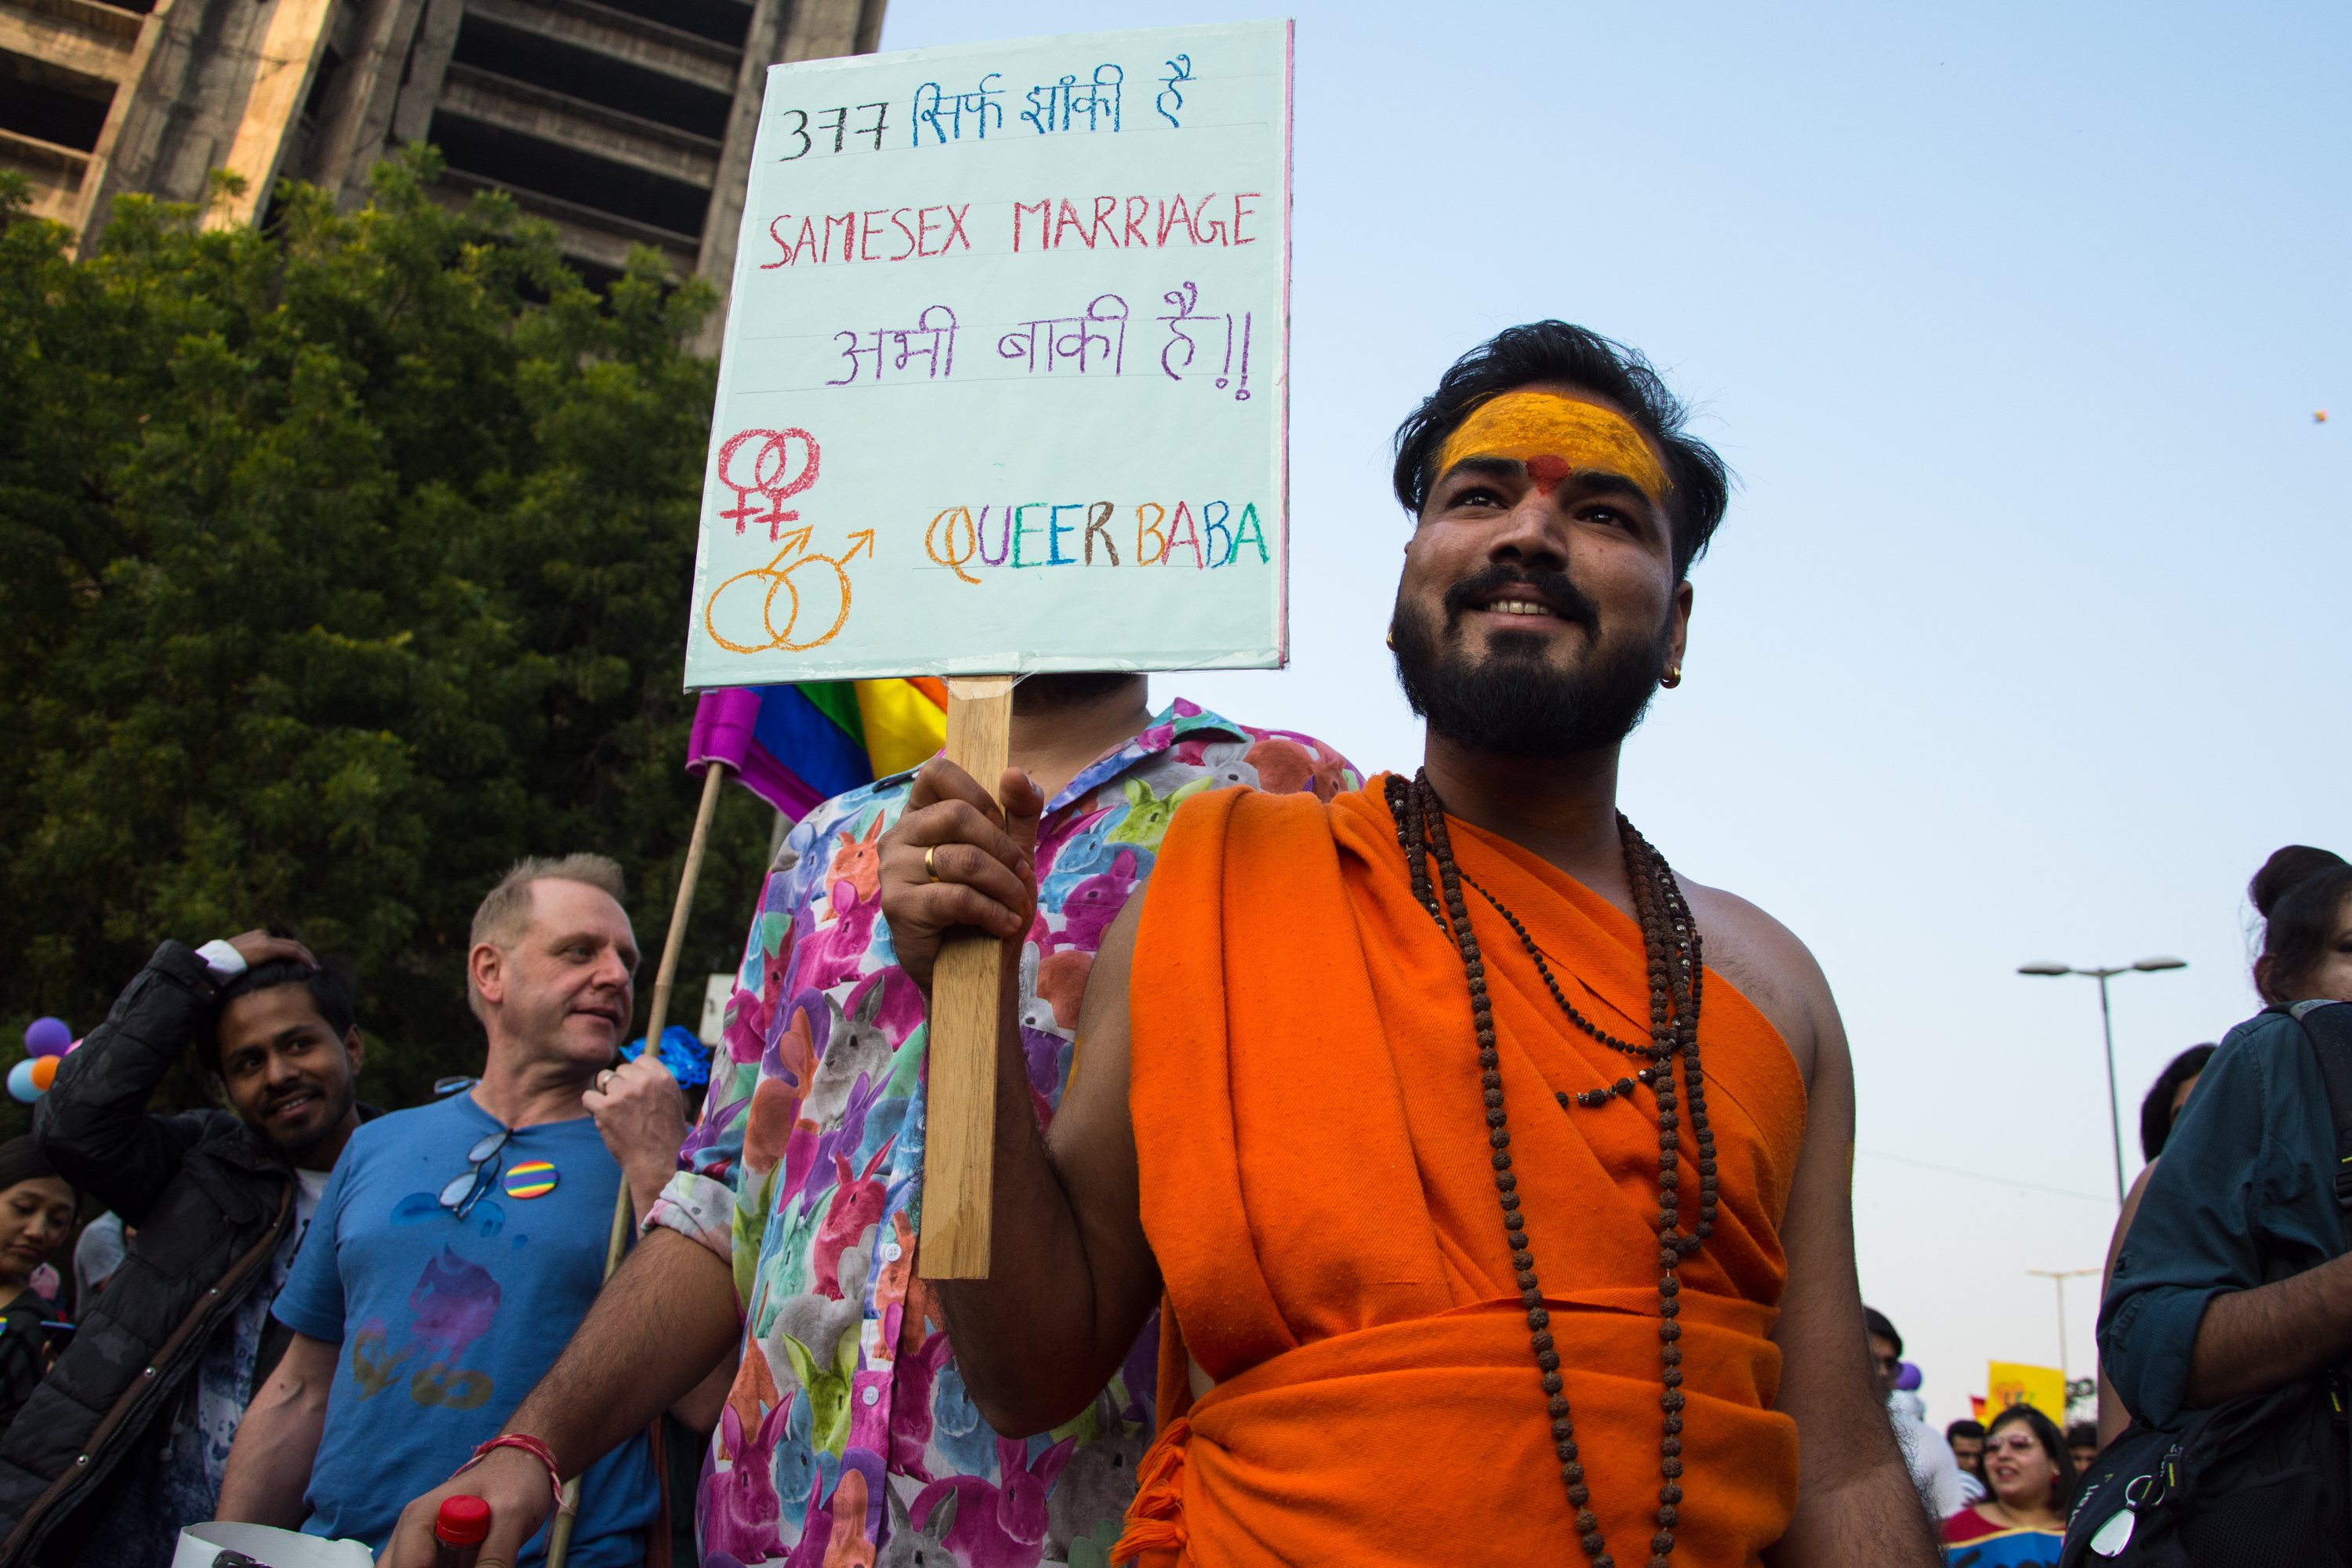 Deepansh Goswami calls himself Queer Baba. He turned out to be as political as he may be queer. Asked about his unusual attire at the Pride, Deepansh said: 